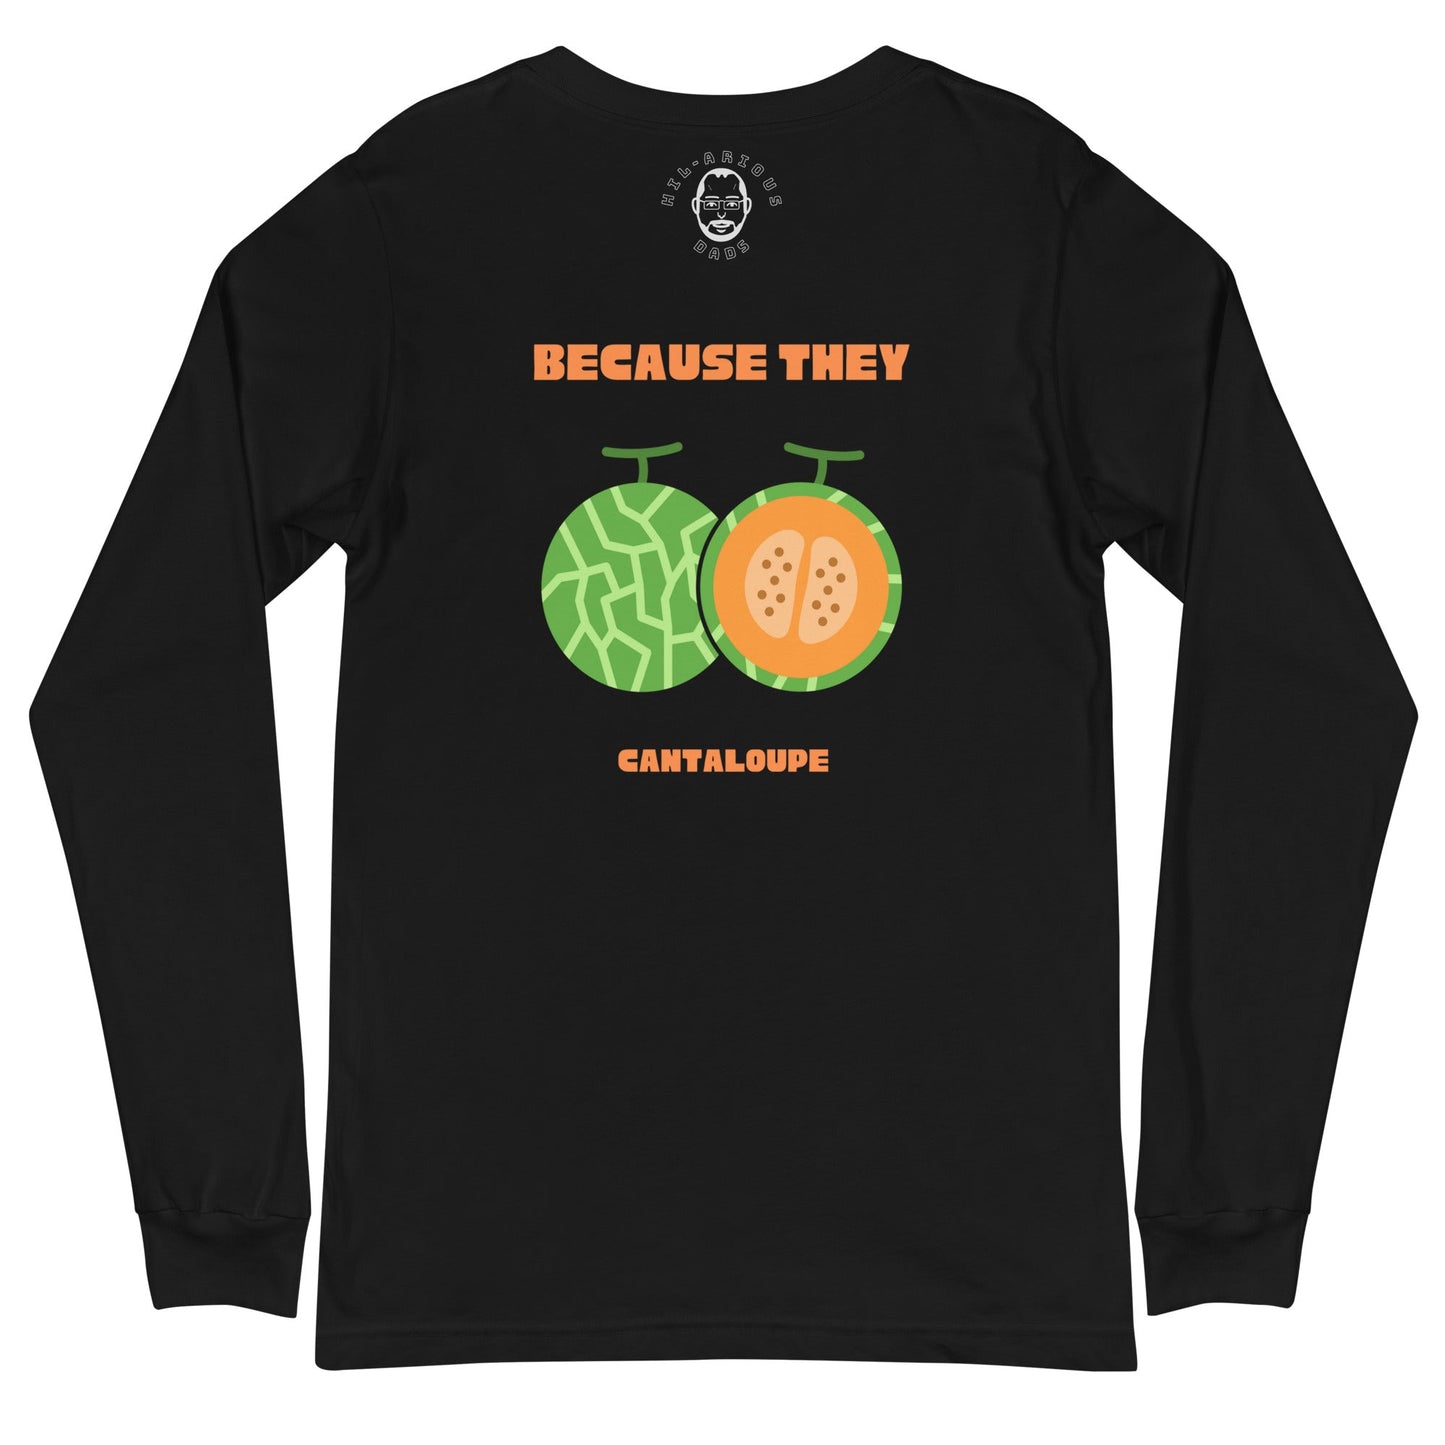 Why didn’t the melons get married?-Long Sleeve Tee - Hil-arious Dads